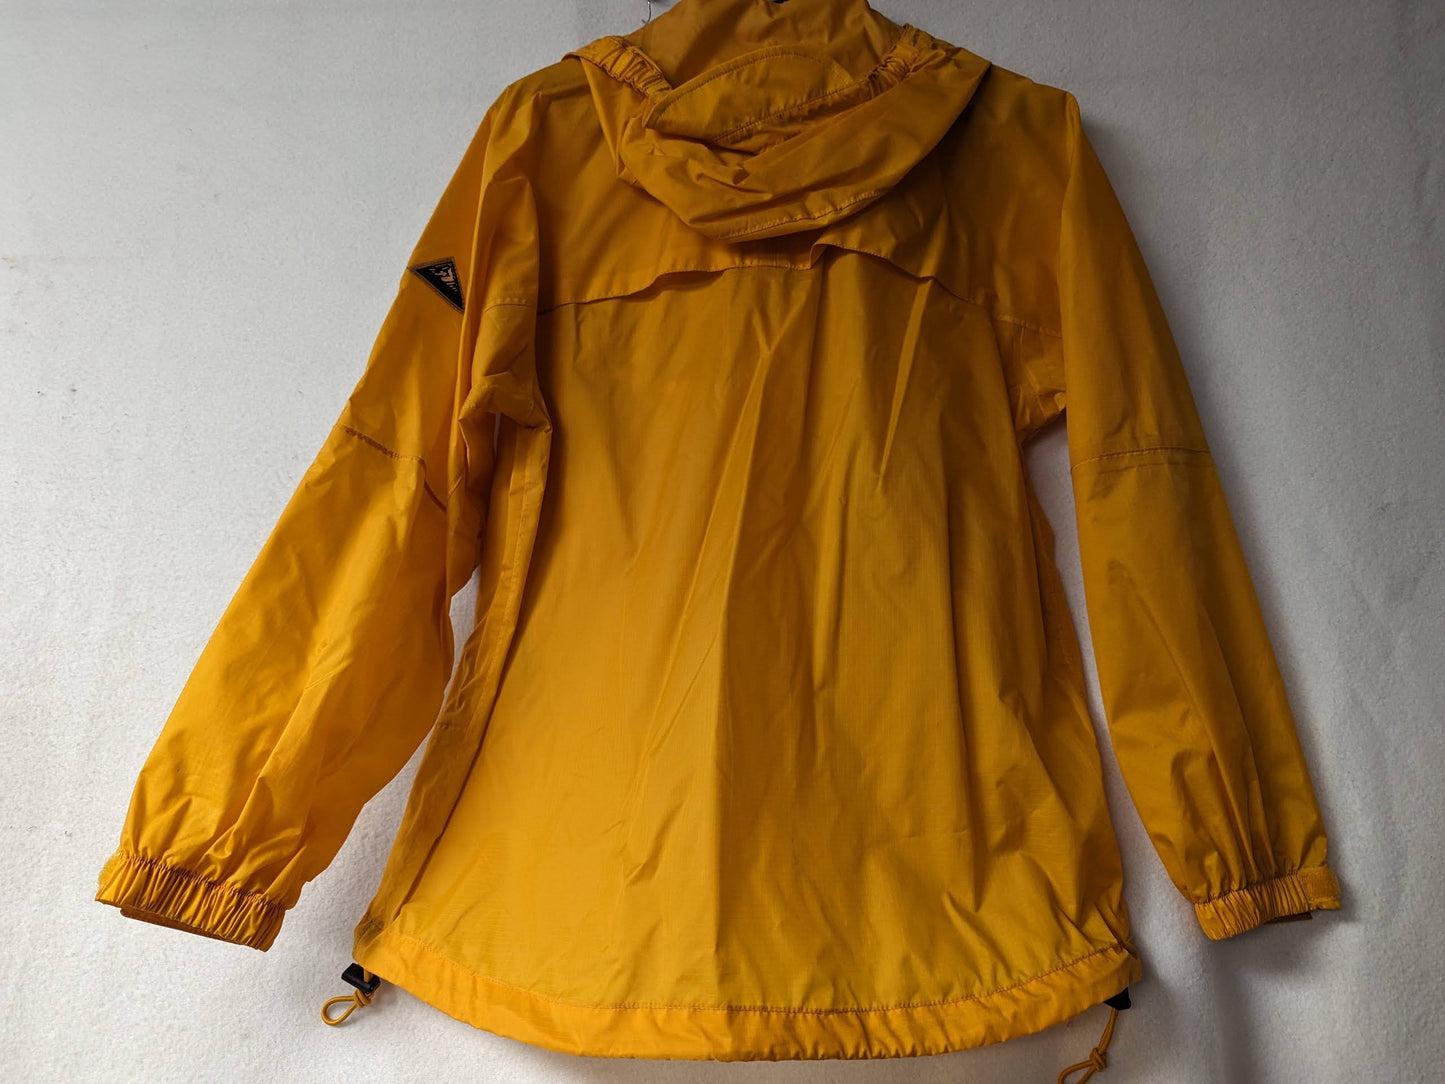 Galyans Shell Hooded Rain Jacket/Coat Size Youth XL Color Orange Condition Used